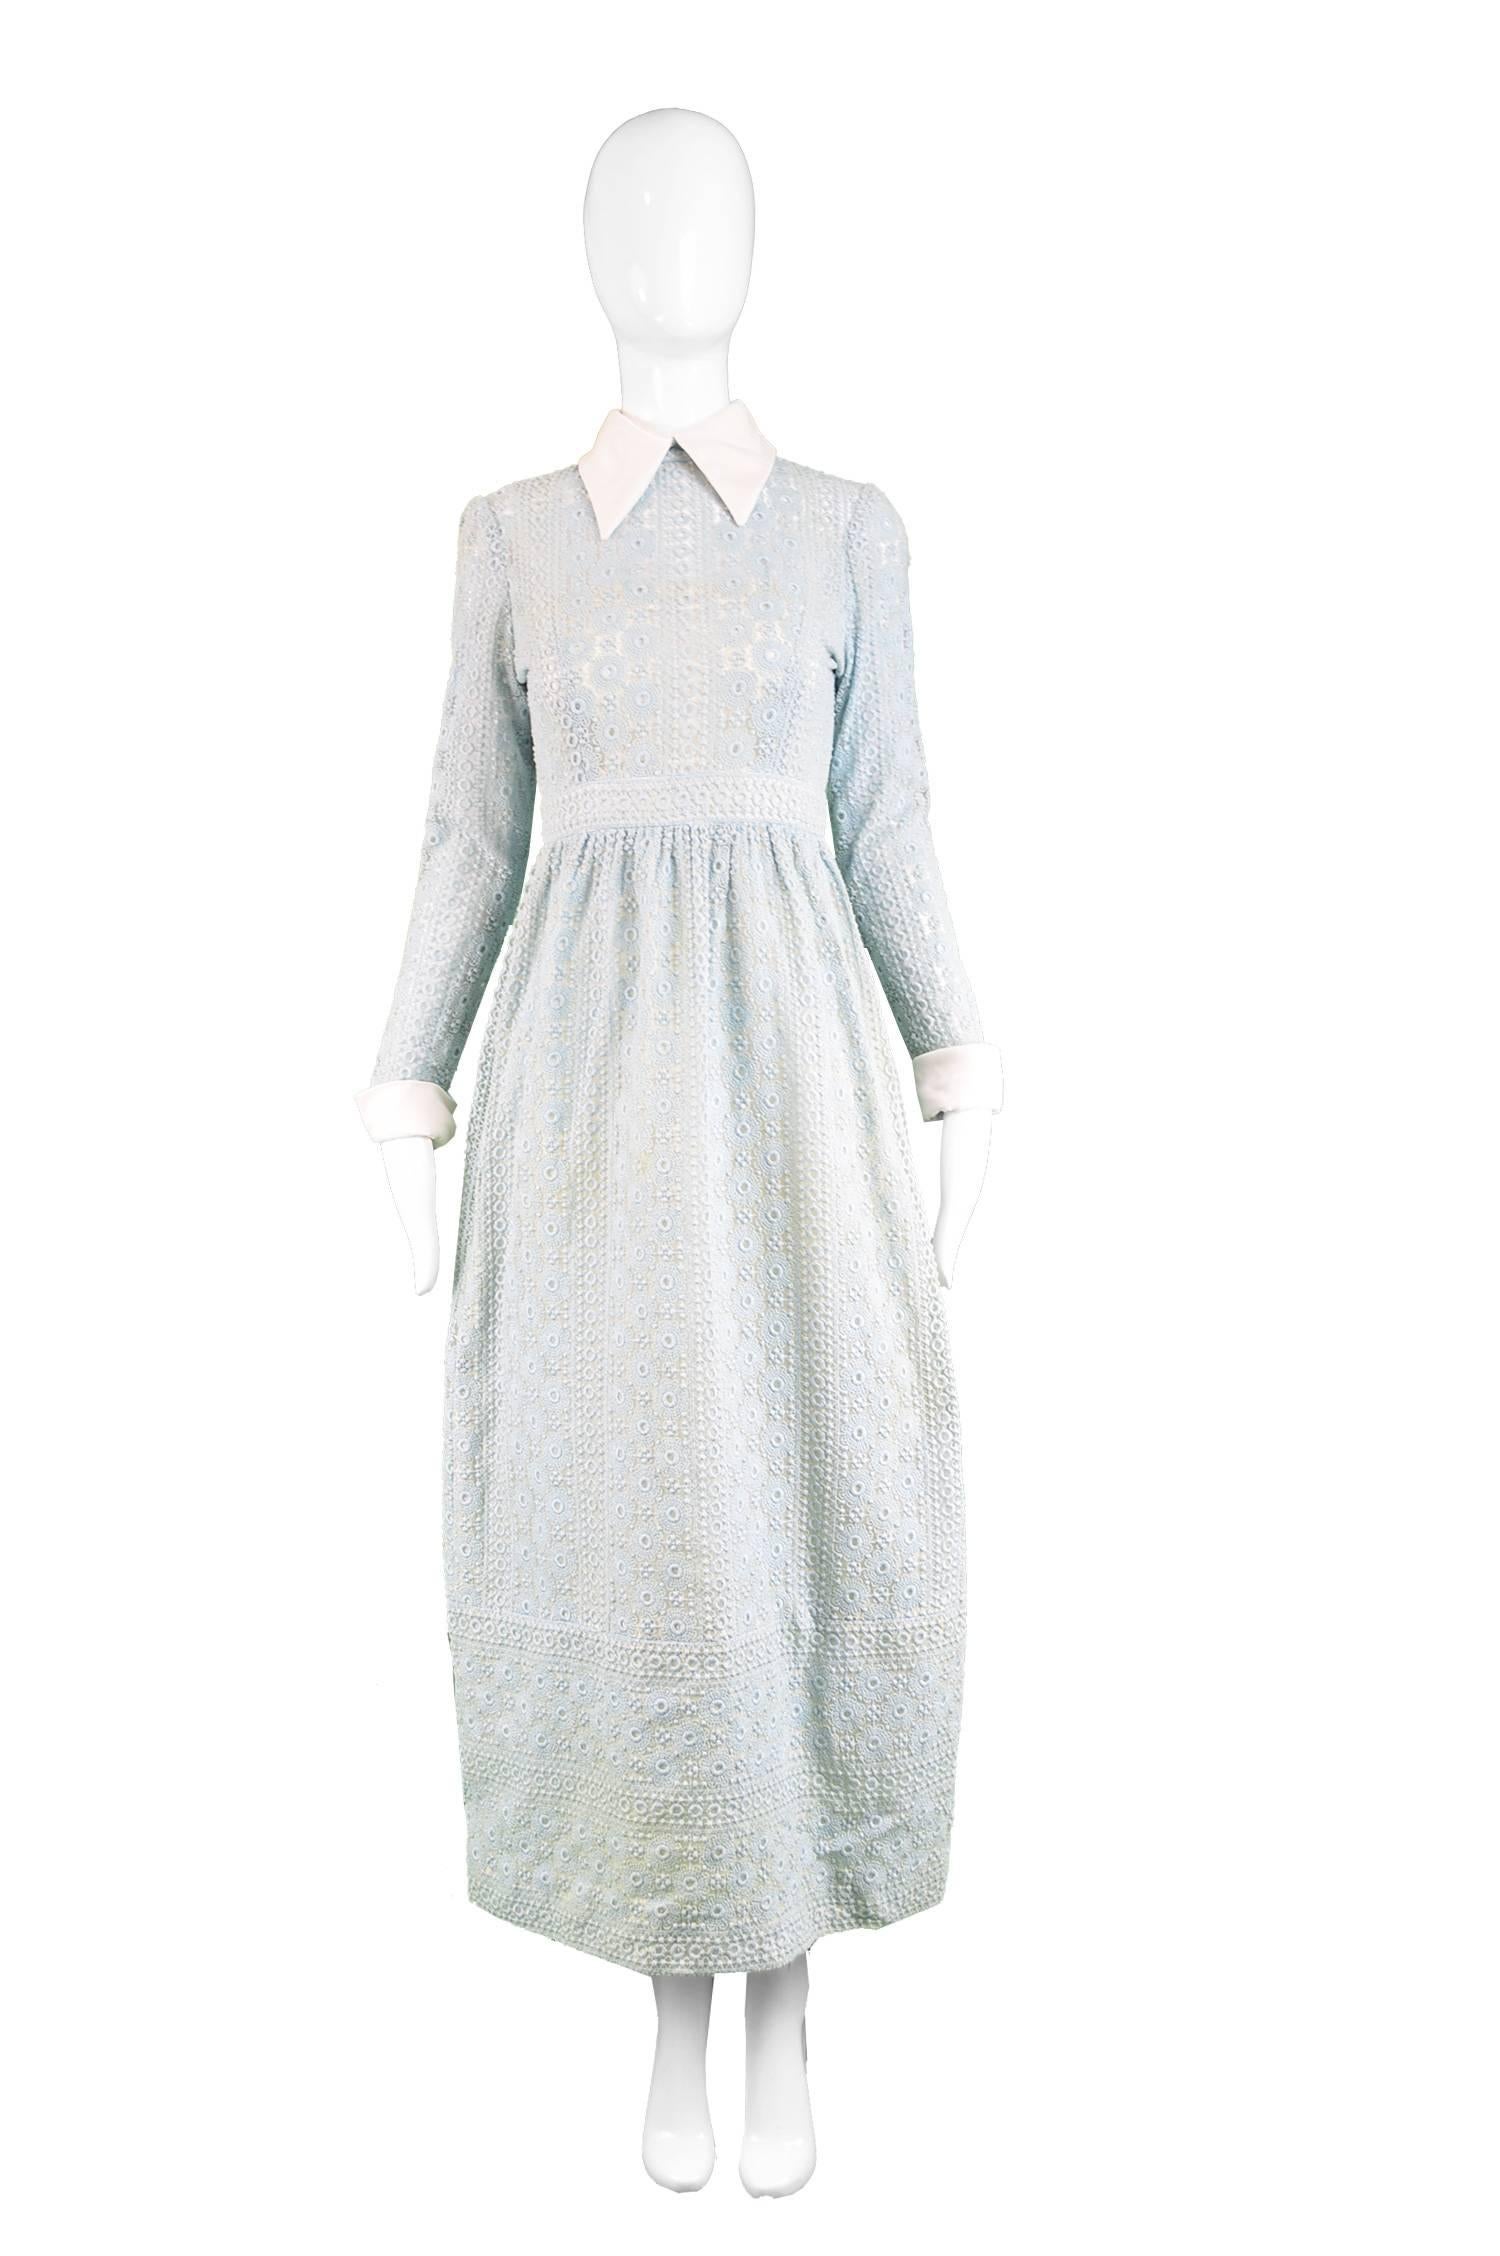 A stunning vintage maxi dress from the early 70s by Victor Costa for his 'Romantica' line. In a pale mint broderie anglaise over an organza fabric that looks almost like a crochet or lace from afar but with much more structure. It features a cream